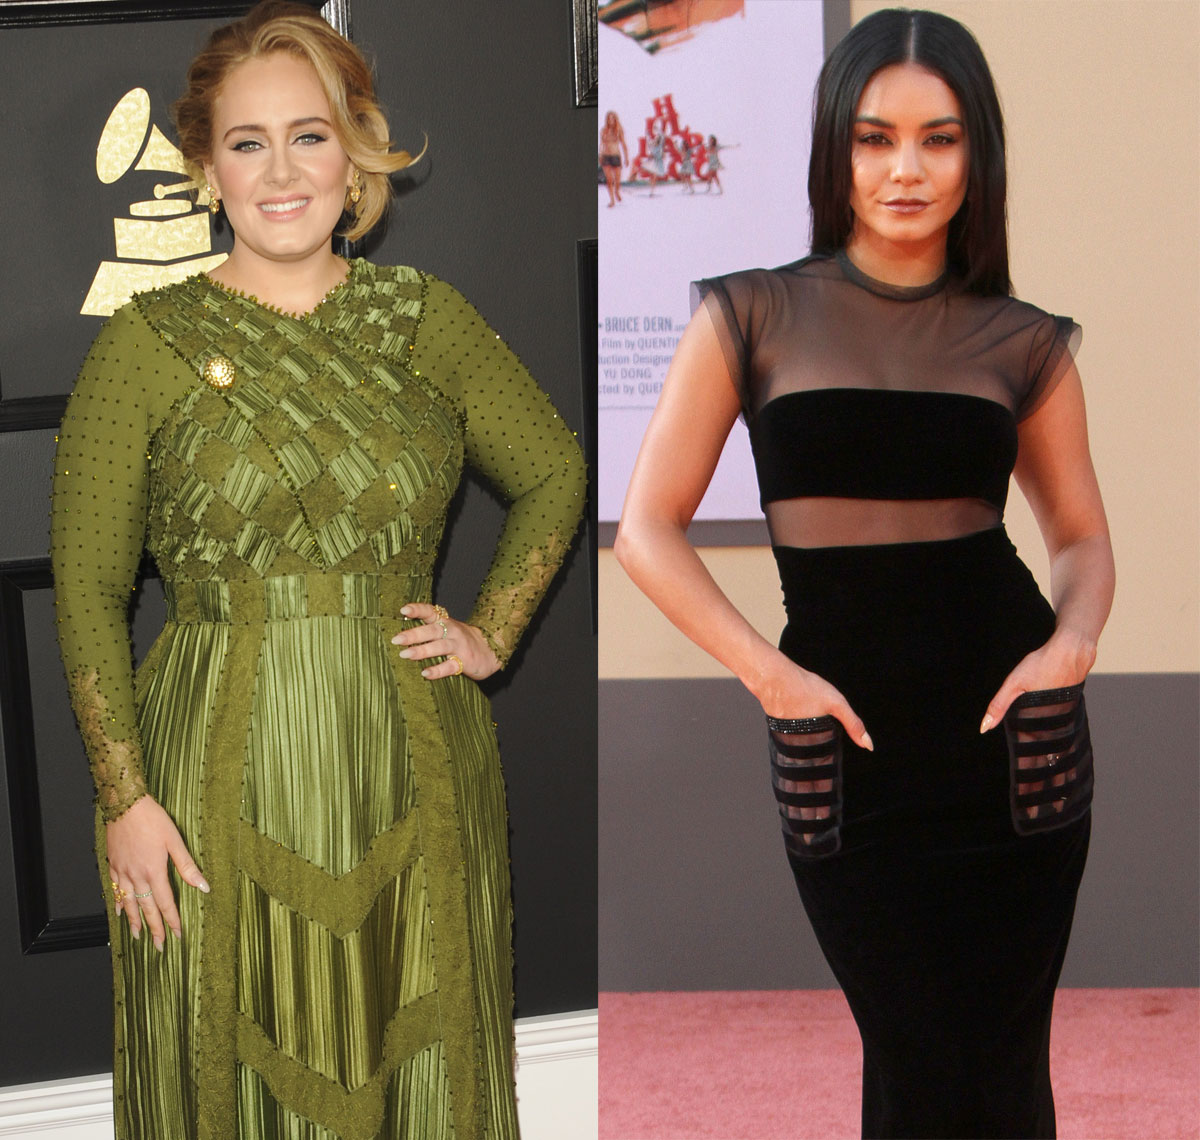 Bet you had no idea Adele and Vanessa Hudgens are the same age!